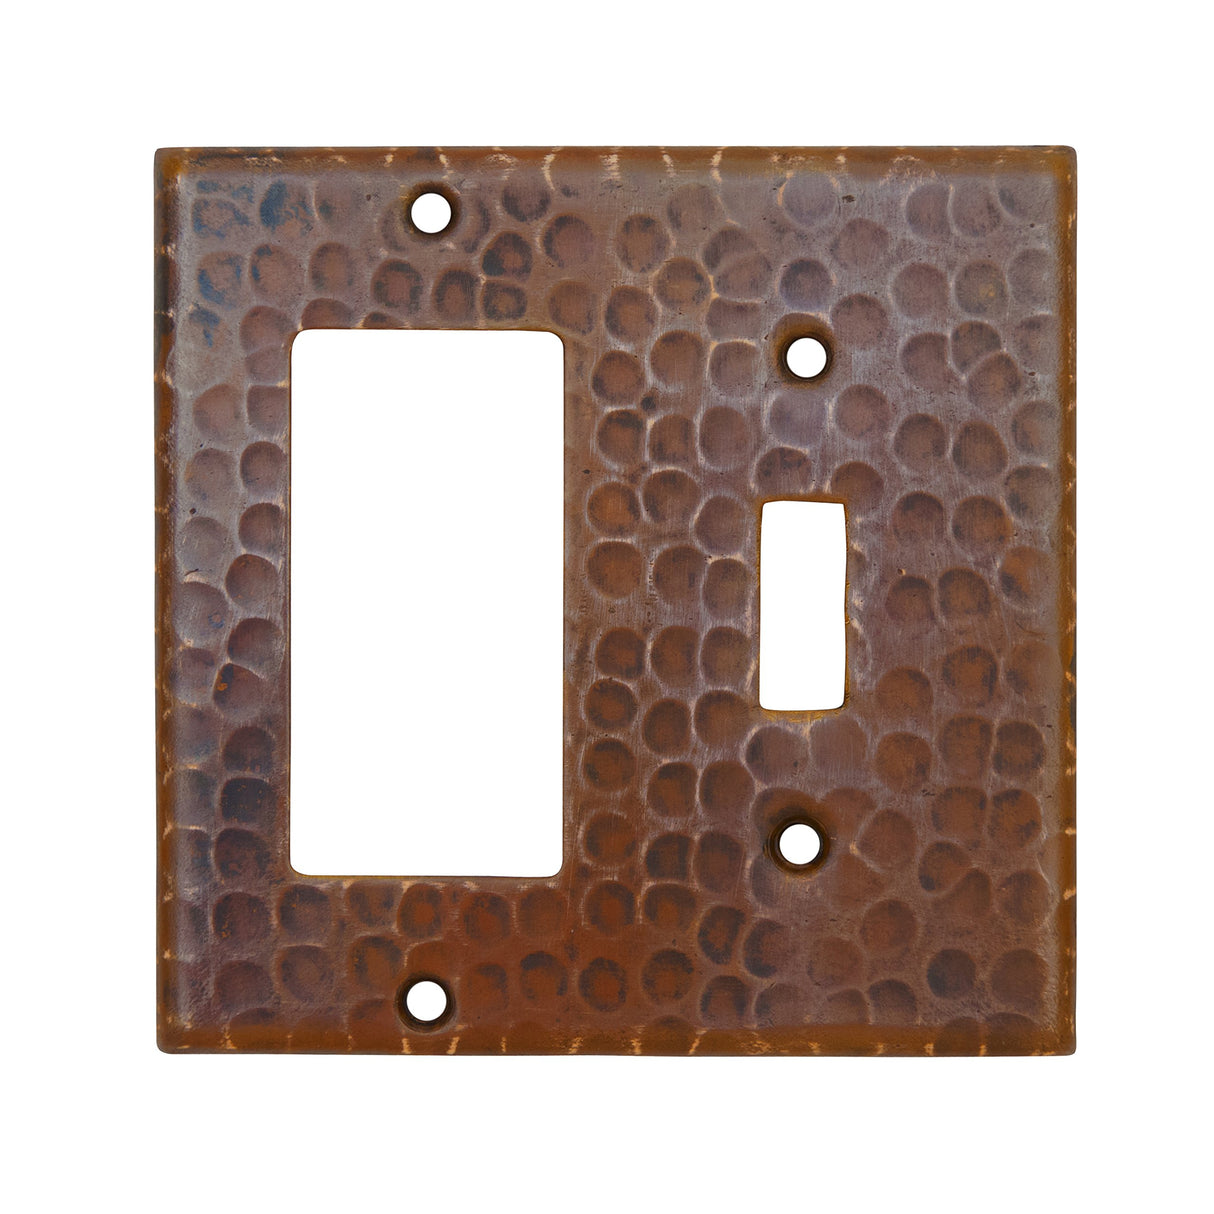 Premier Copper Products SCRT Copper Combination Switchplate with 1-Hole Single Toggle Switch